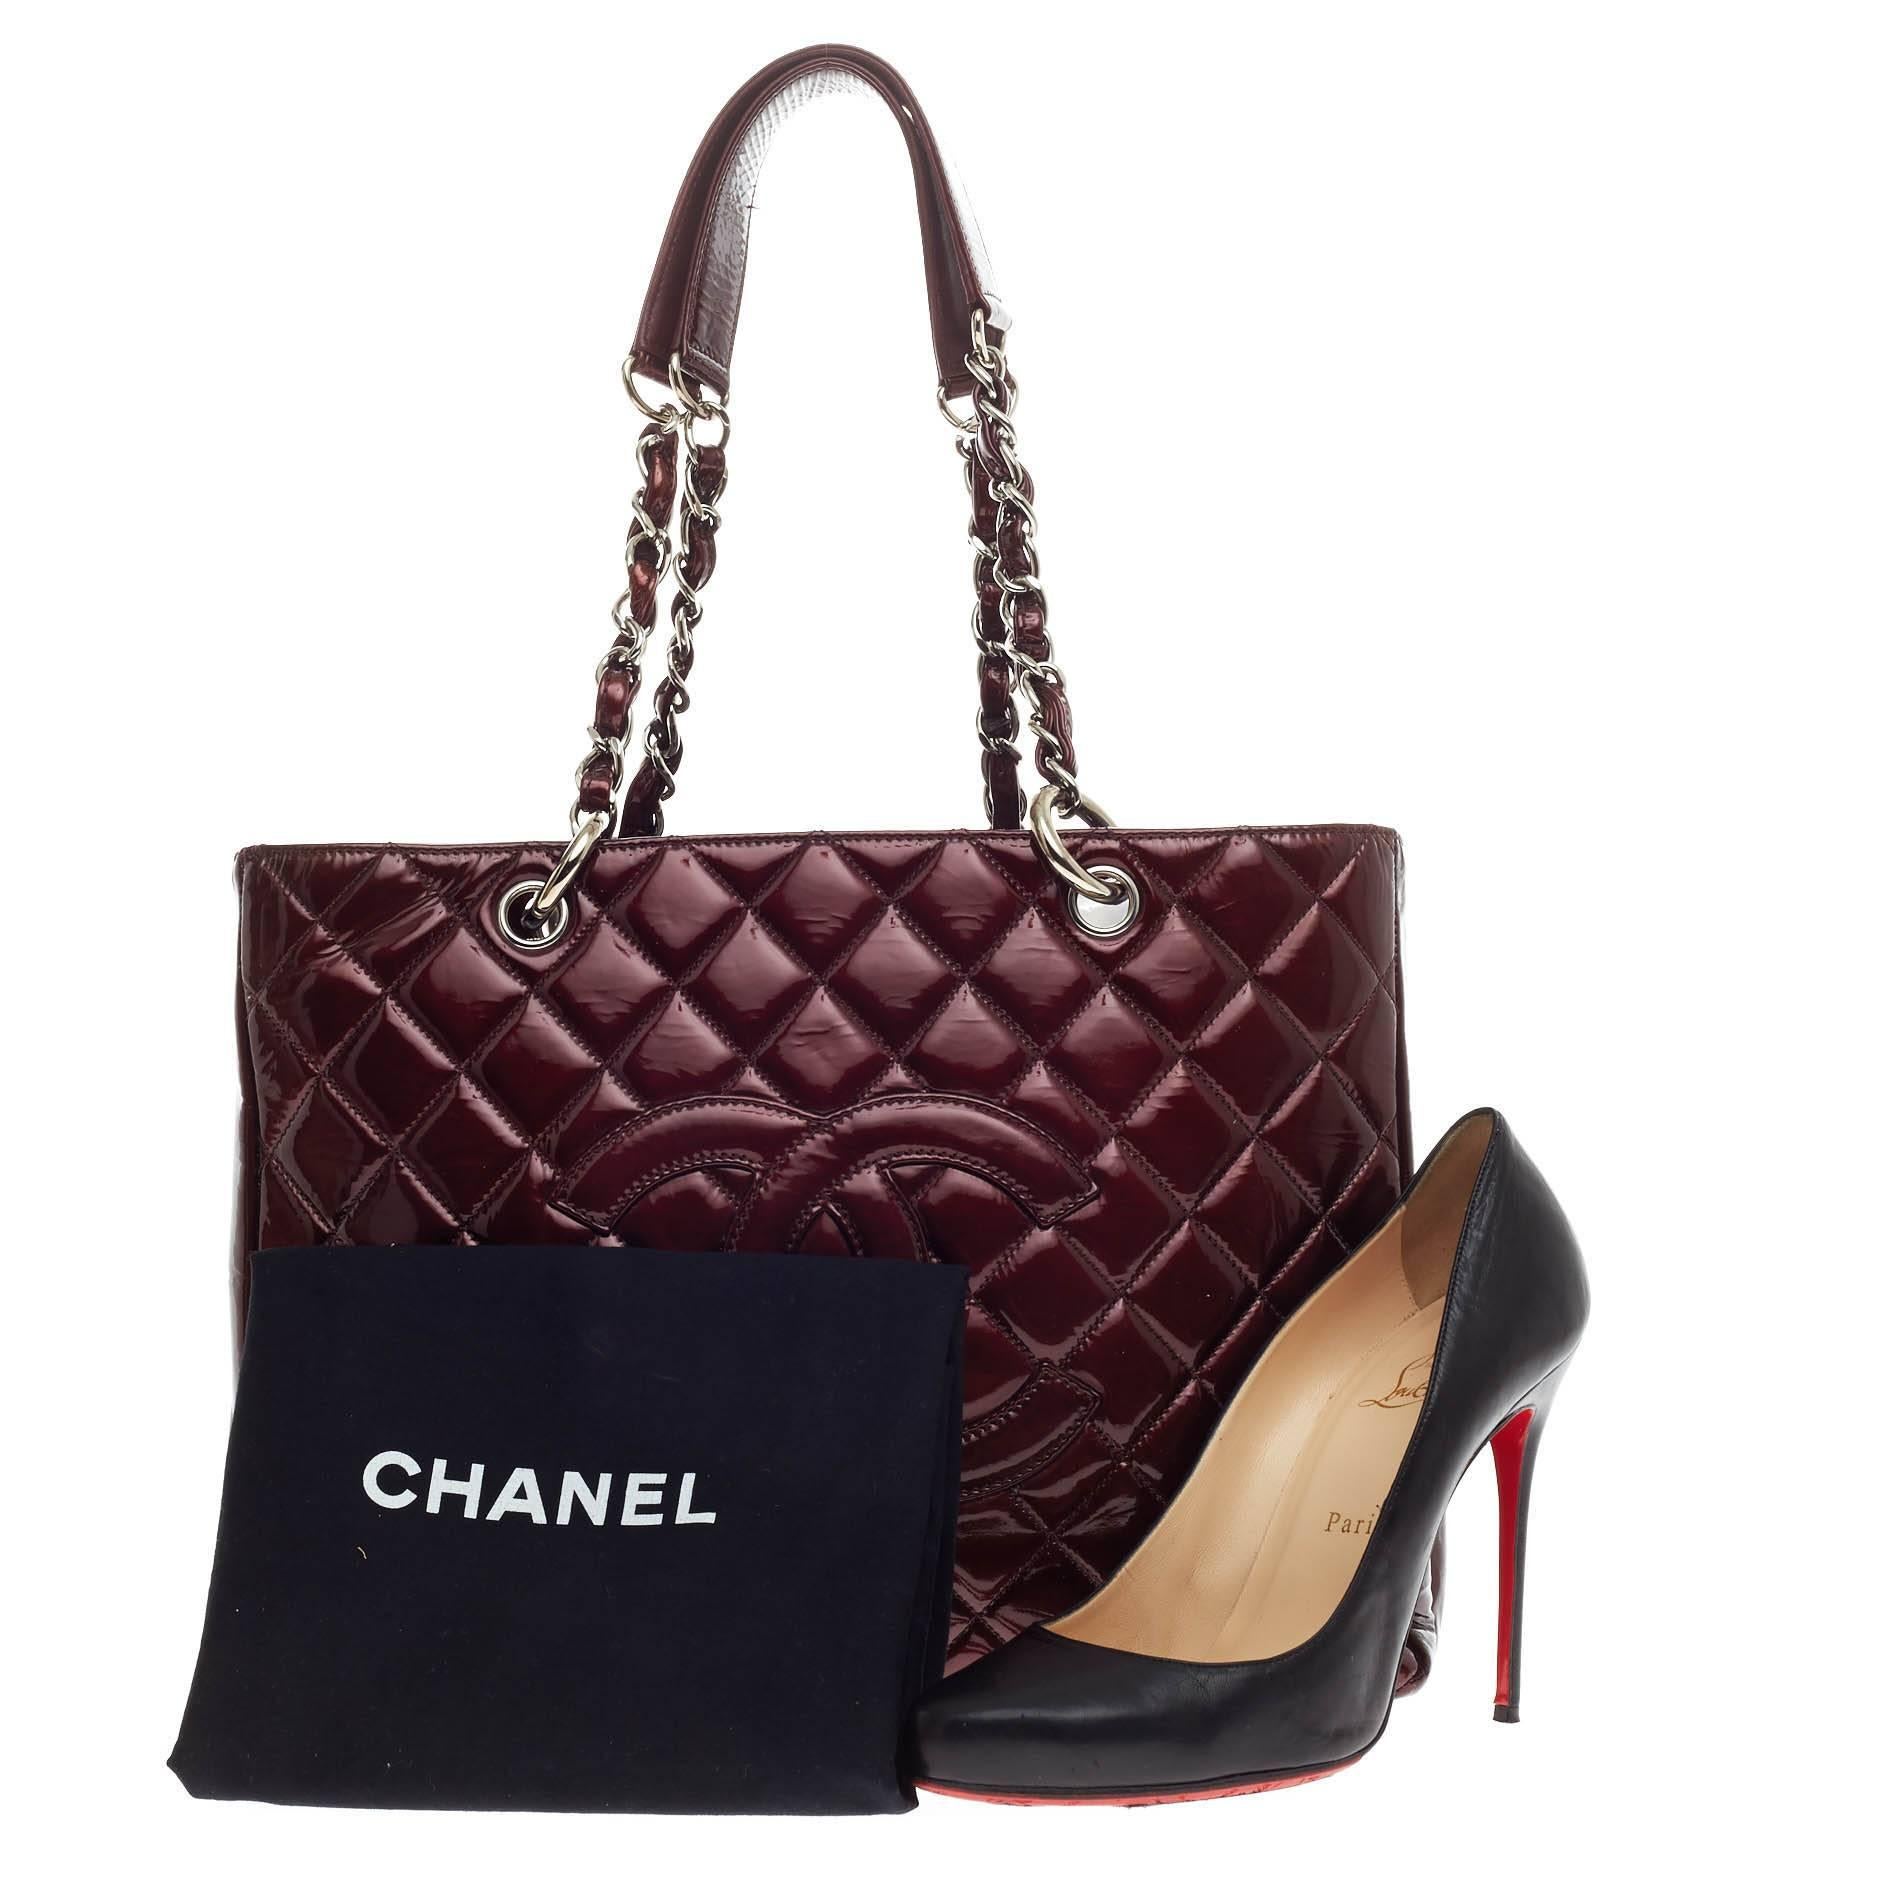 This authentic Chanel Grand Shopping Tote Patent showcases a classic yet luxurious style perfect for everyday use. Crafted from deep burgundy diamond quilted patent leather, this versatile, chic tote features woven-in leather chain straps with